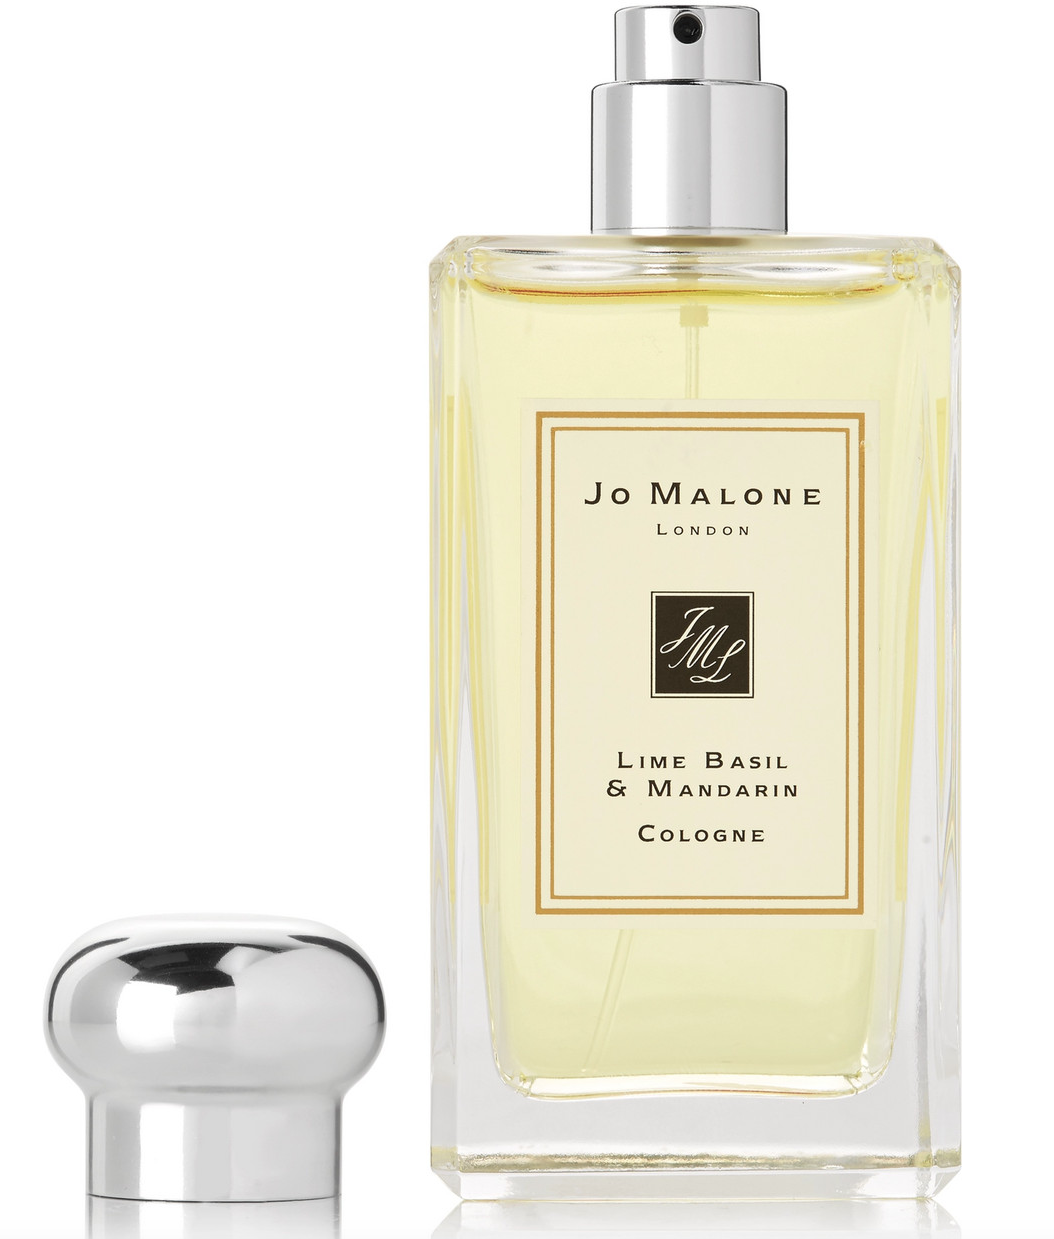 B&M is selling dupes of popular Jo Malone perfumes for only £3 | Woman